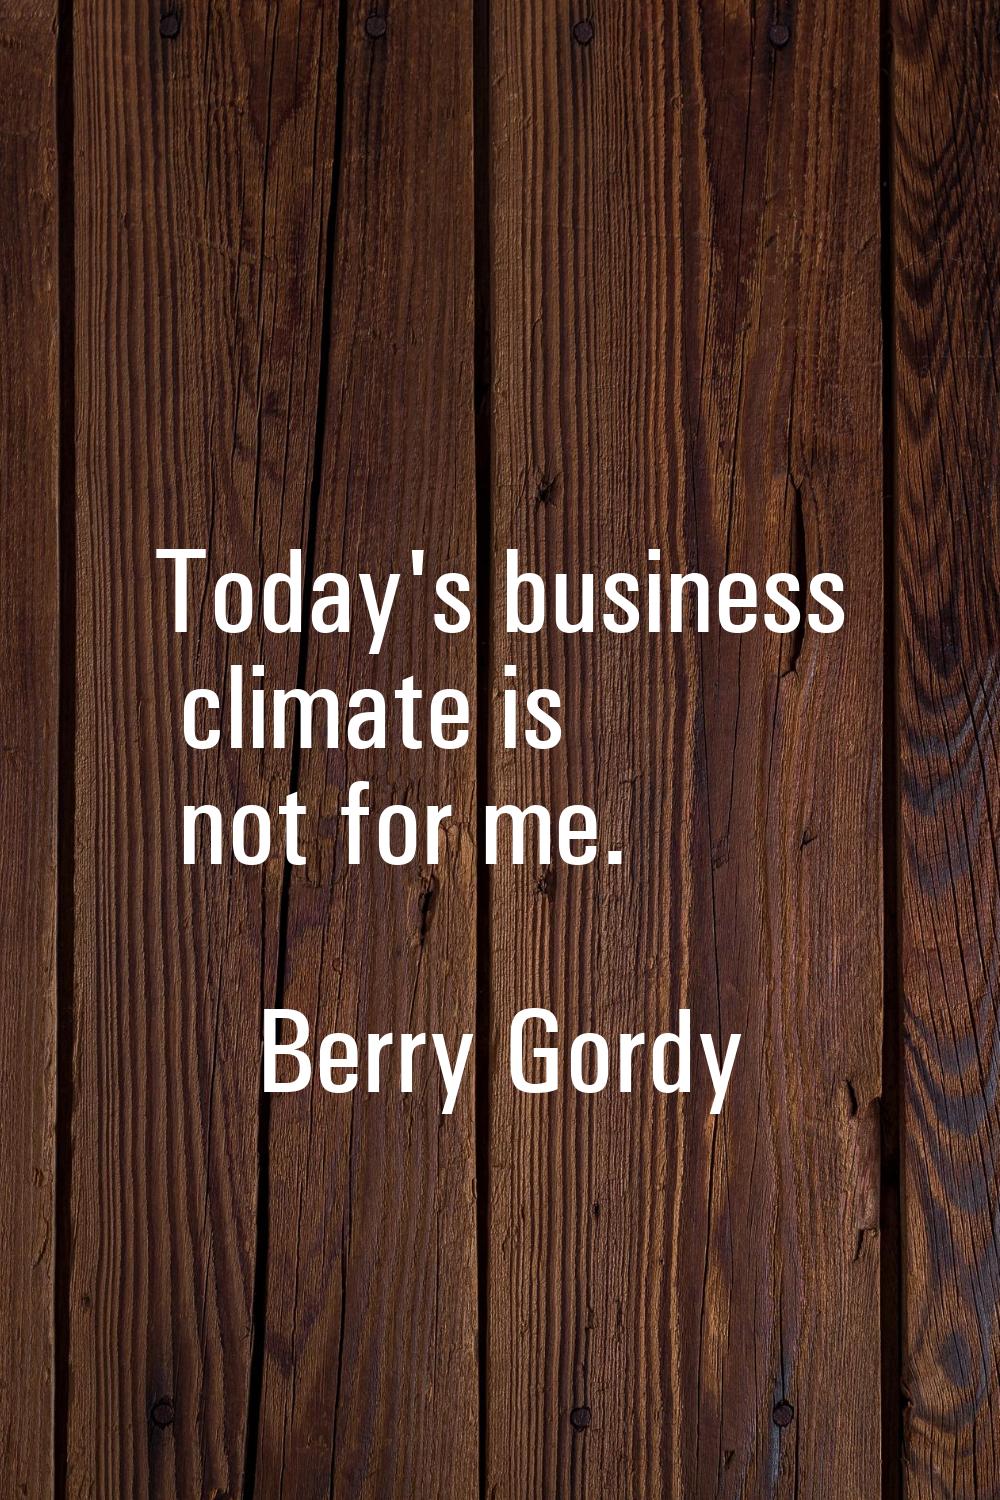 Today's business climate is not for me.